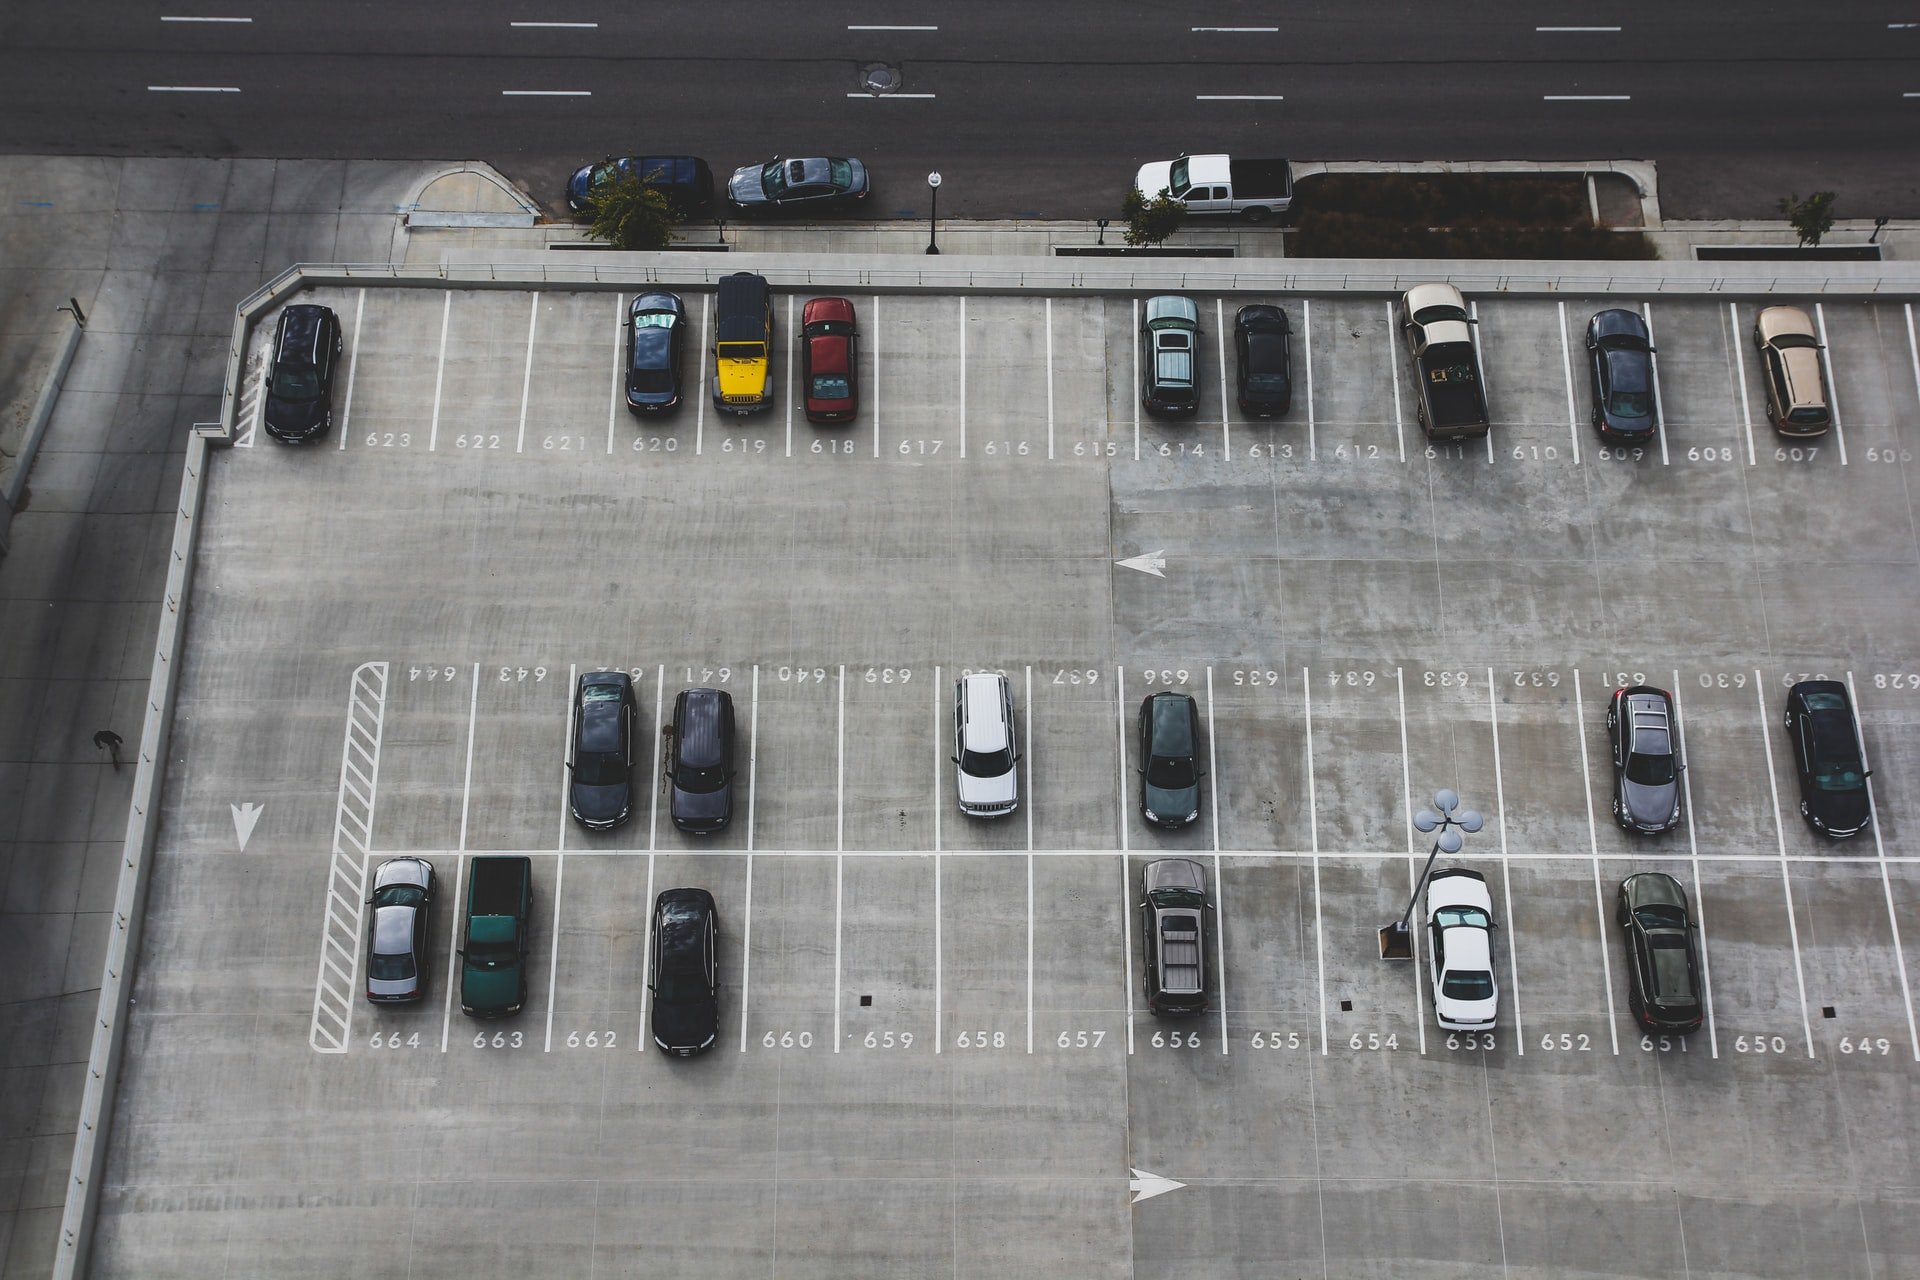 She couldn't find her car in the parking lot | Source: Unsplash